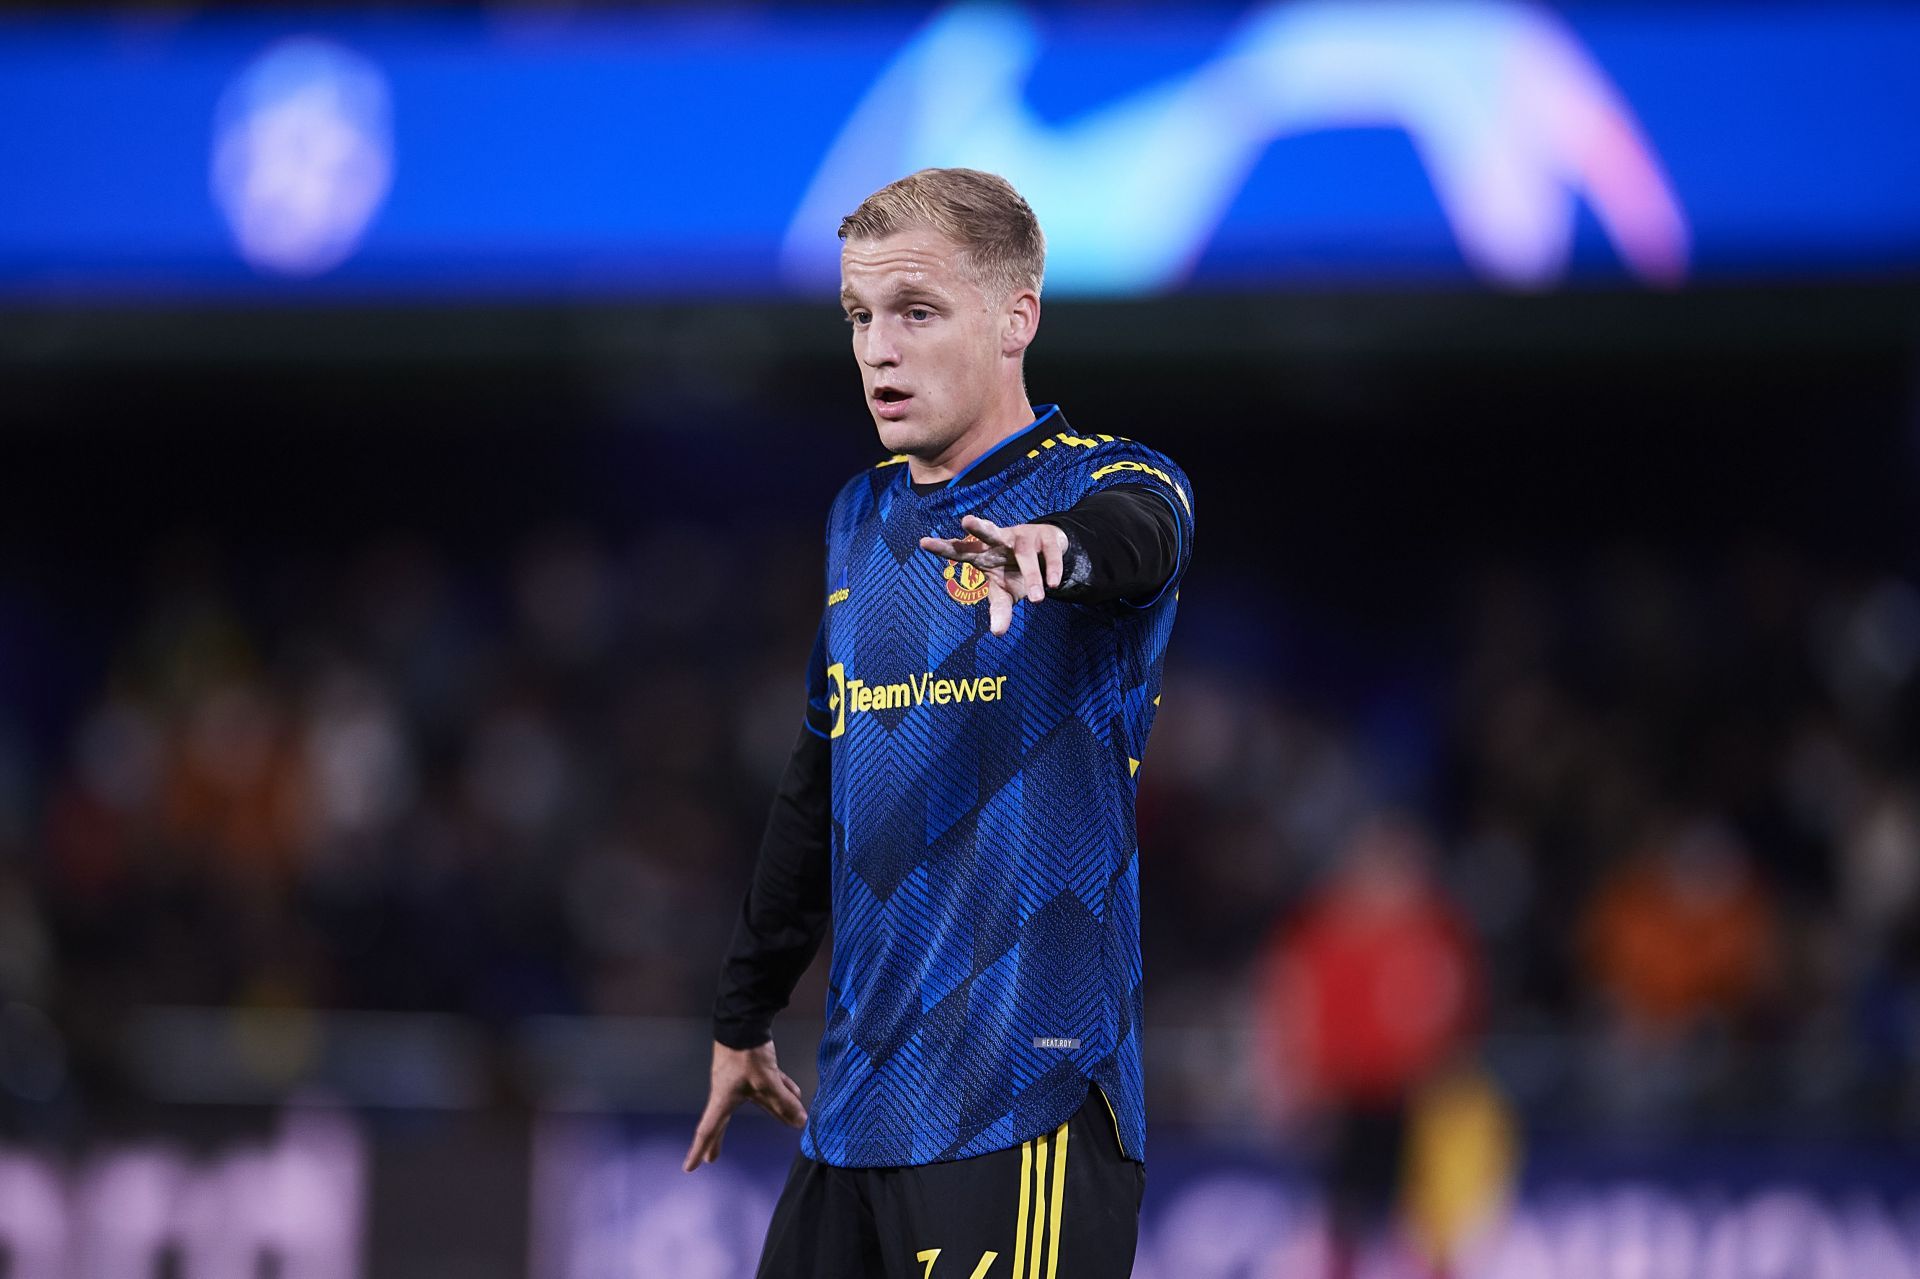 Van de Beek is yet to be involved from the start Premier League this term